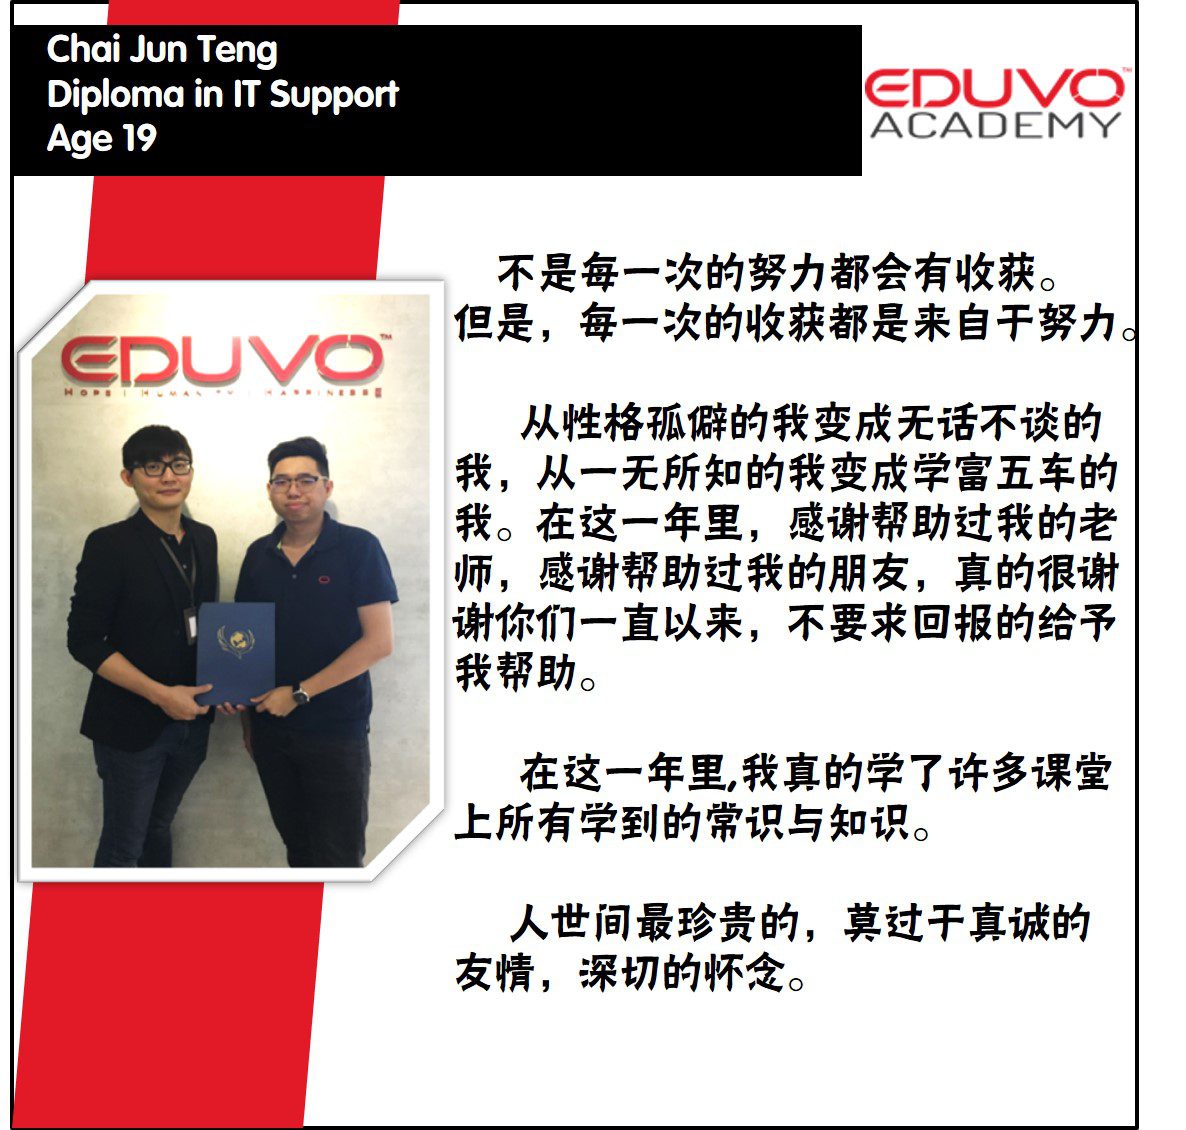 Diploma in IT Support - Chai Jun Teng